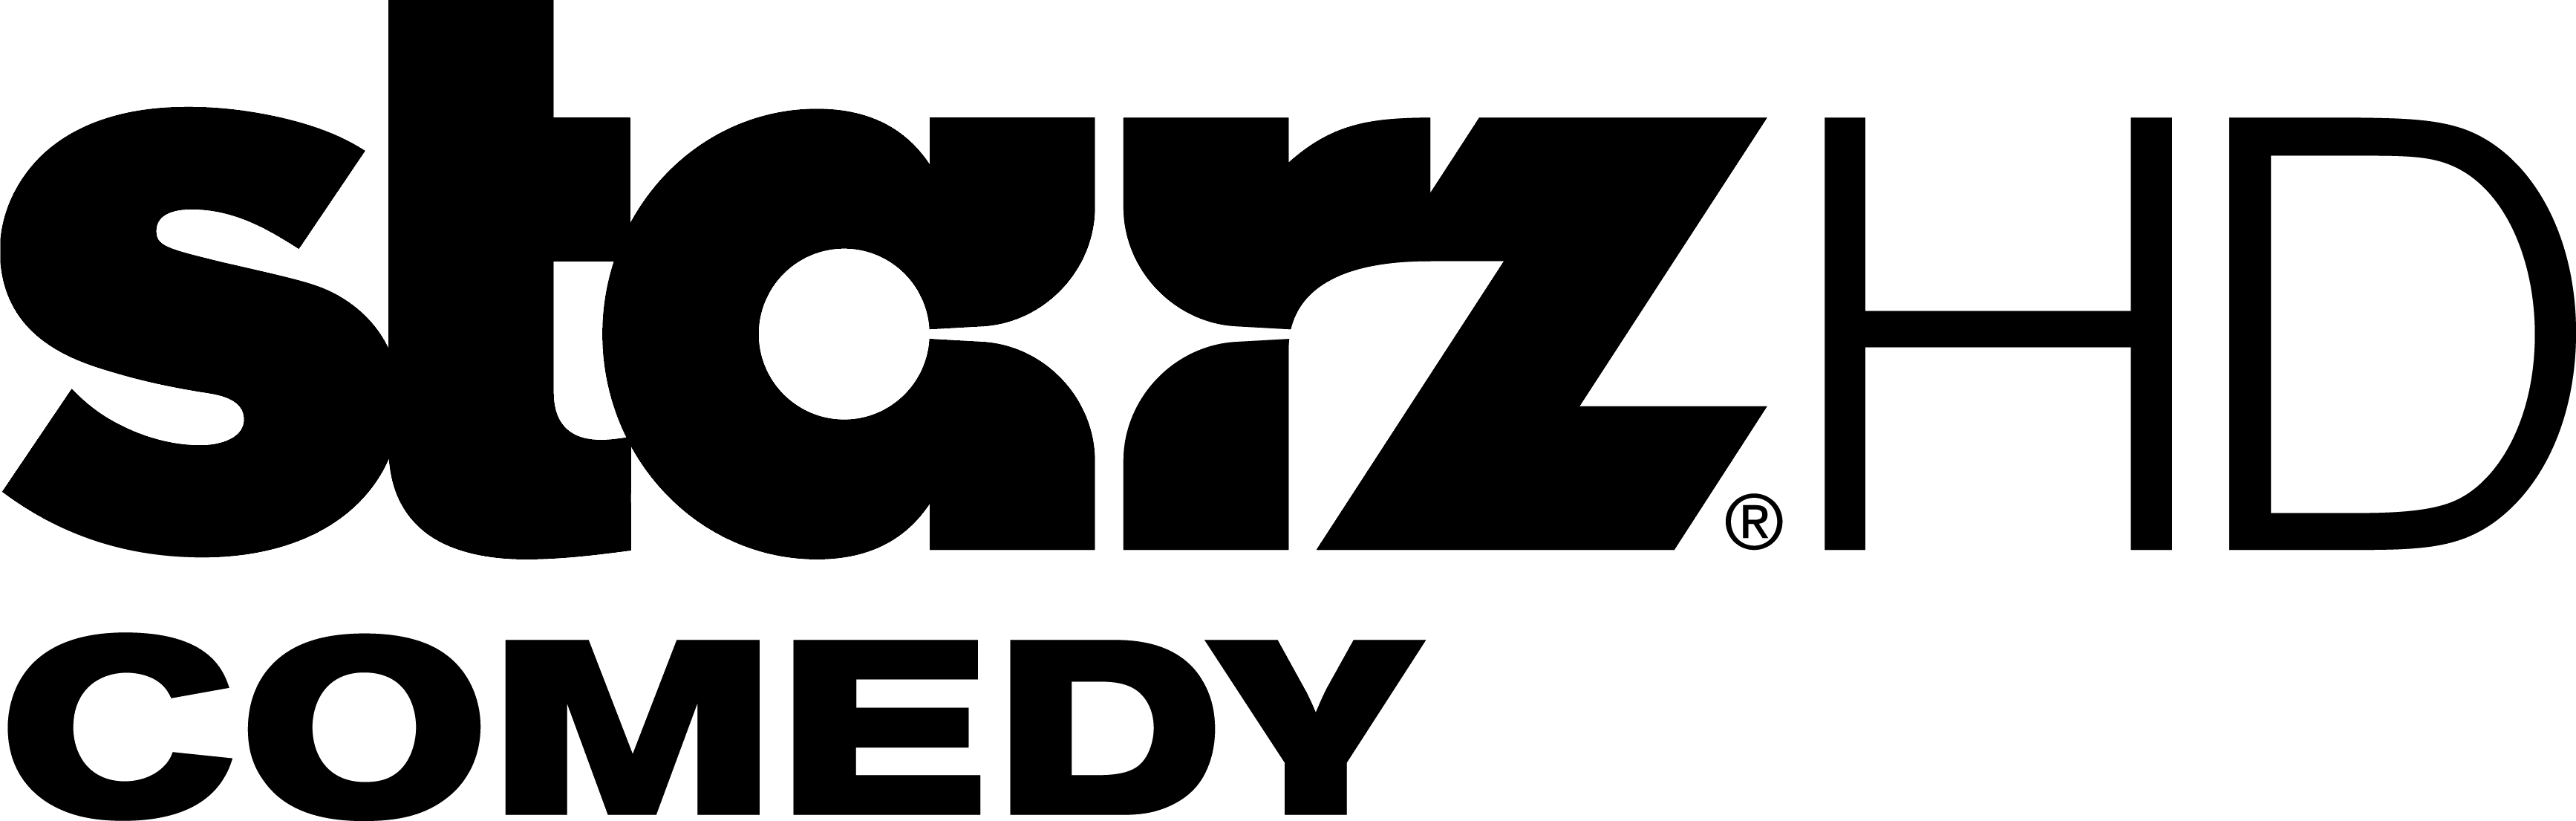 Starz Comedy Hd.png - Comedy, Transparent background PNG HD thumbnail